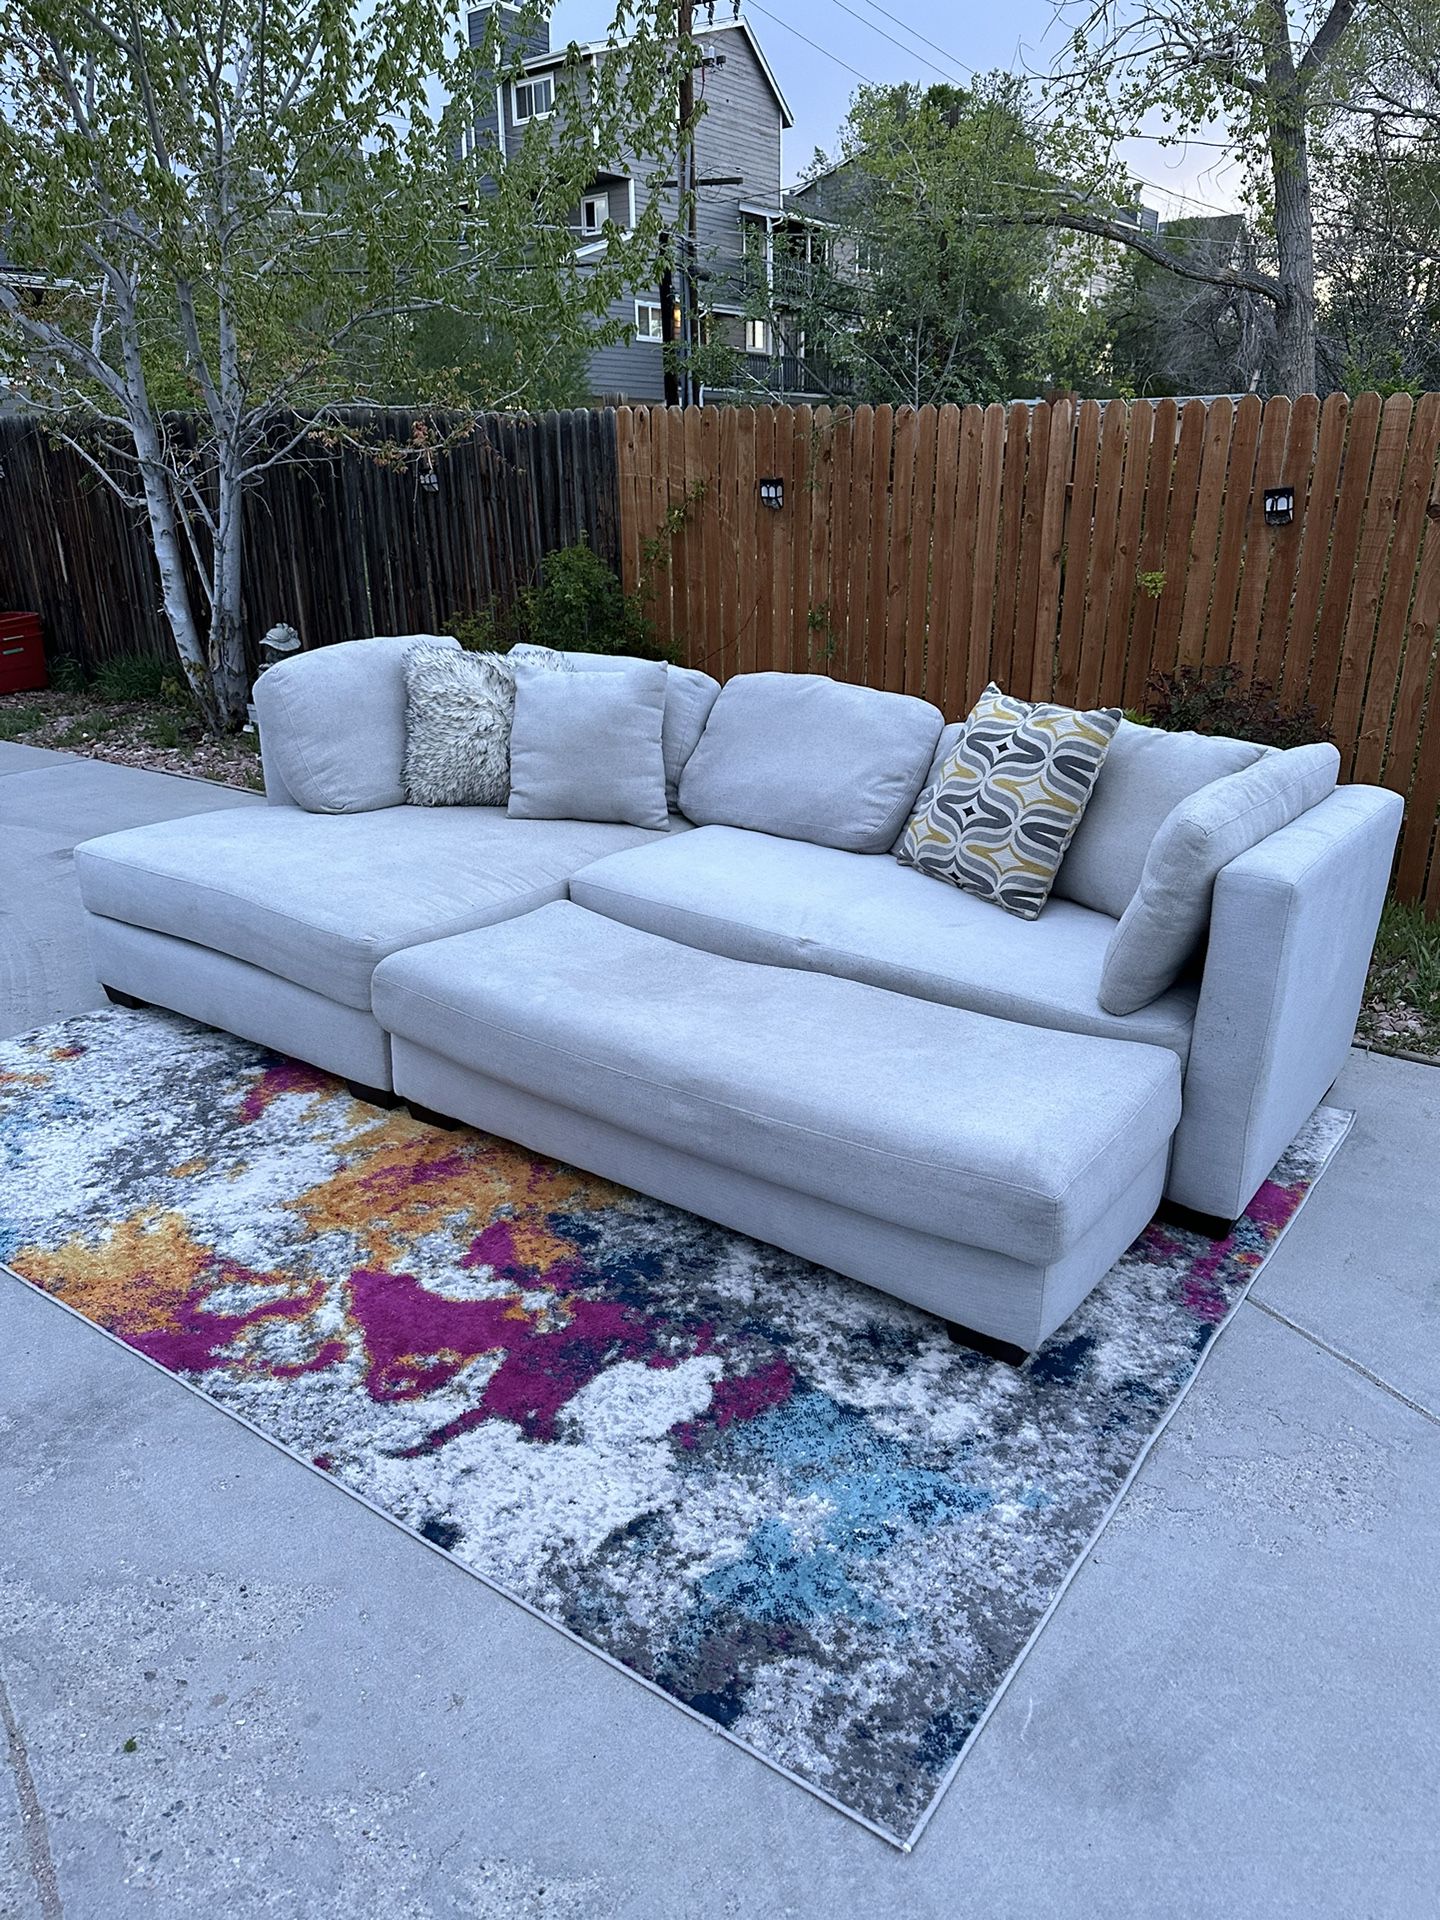 🚚 FREE DELIVERY ! Beautiful White Sectional Couch